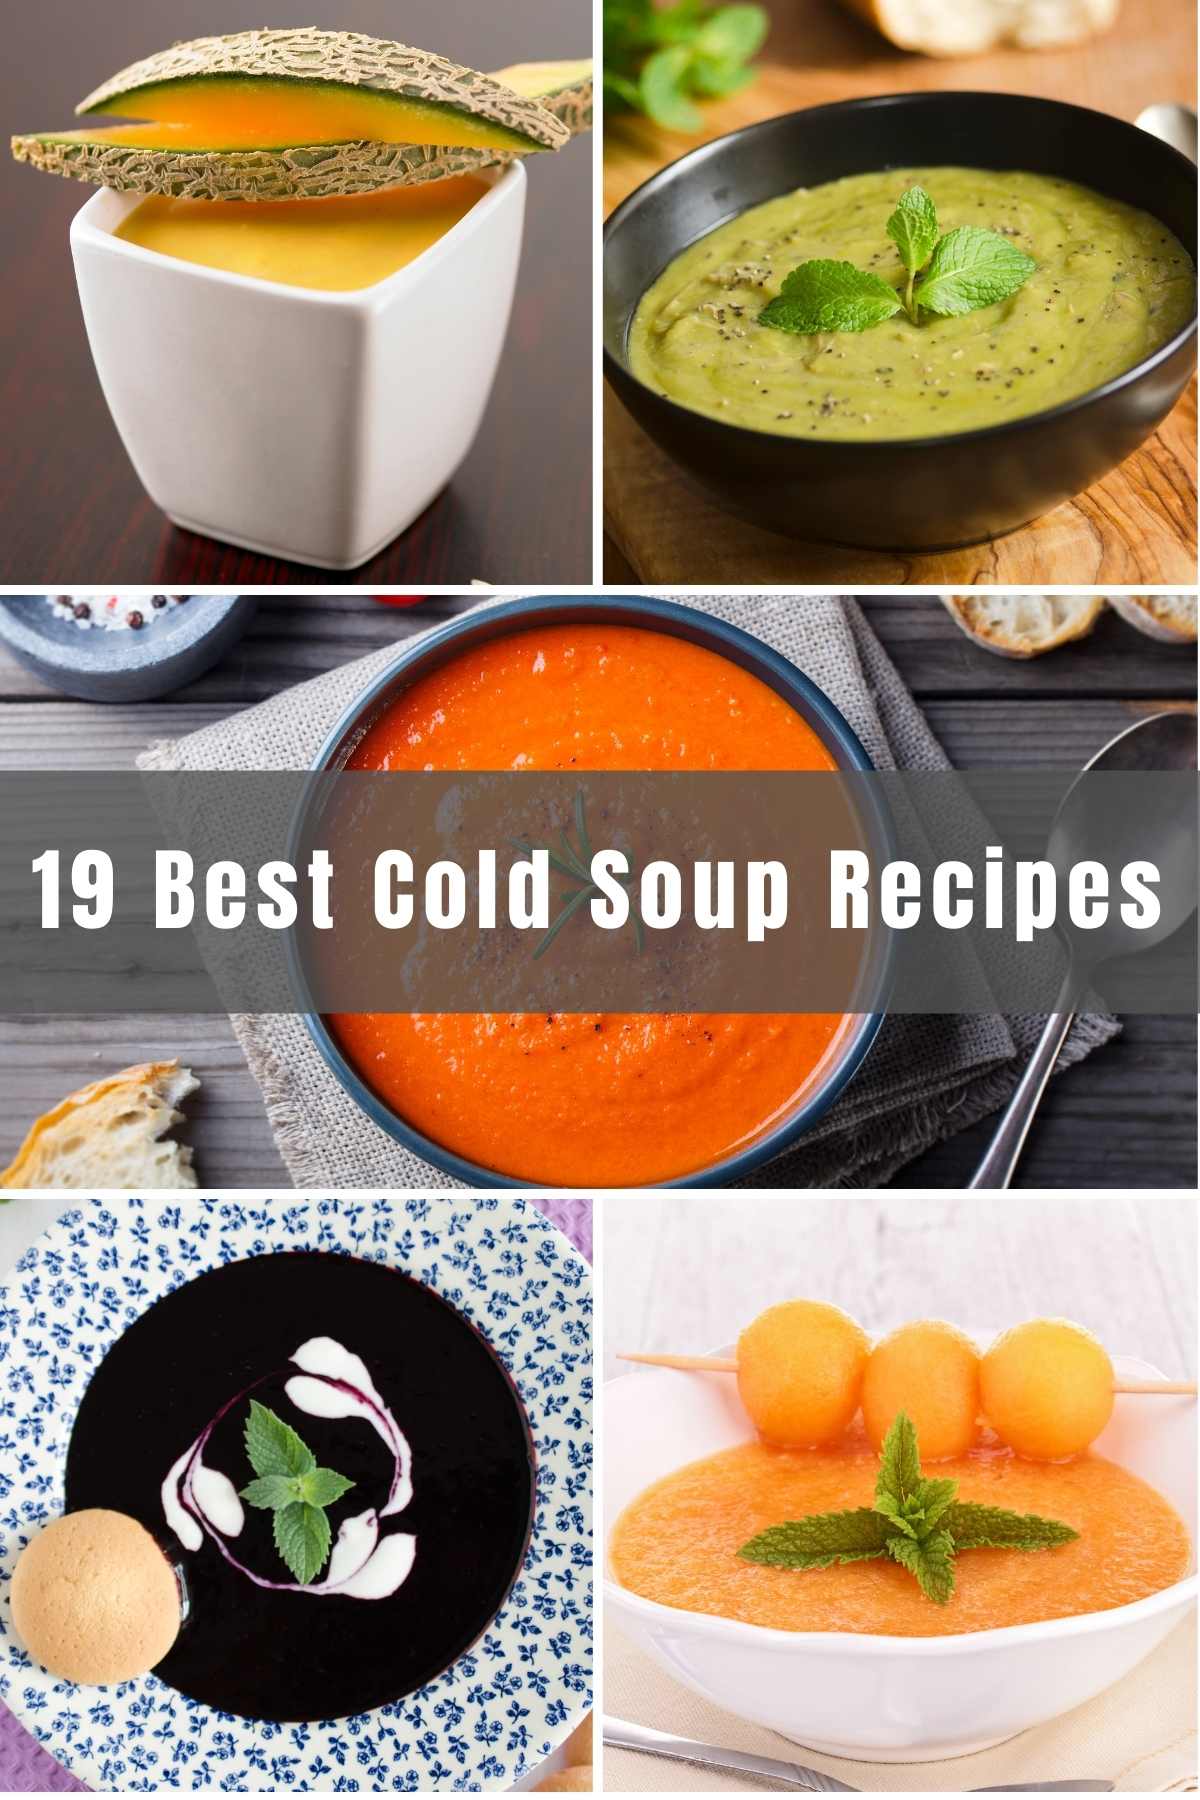 If cold soups are something you’ve never tried, you have no idea what you’re missing! Here you’ll find our 19 of the Best Cold Soup Recipes that will satisfy your stomach and lower your temperature! From sweet to savoury, this article has everything you’ve been searching for.